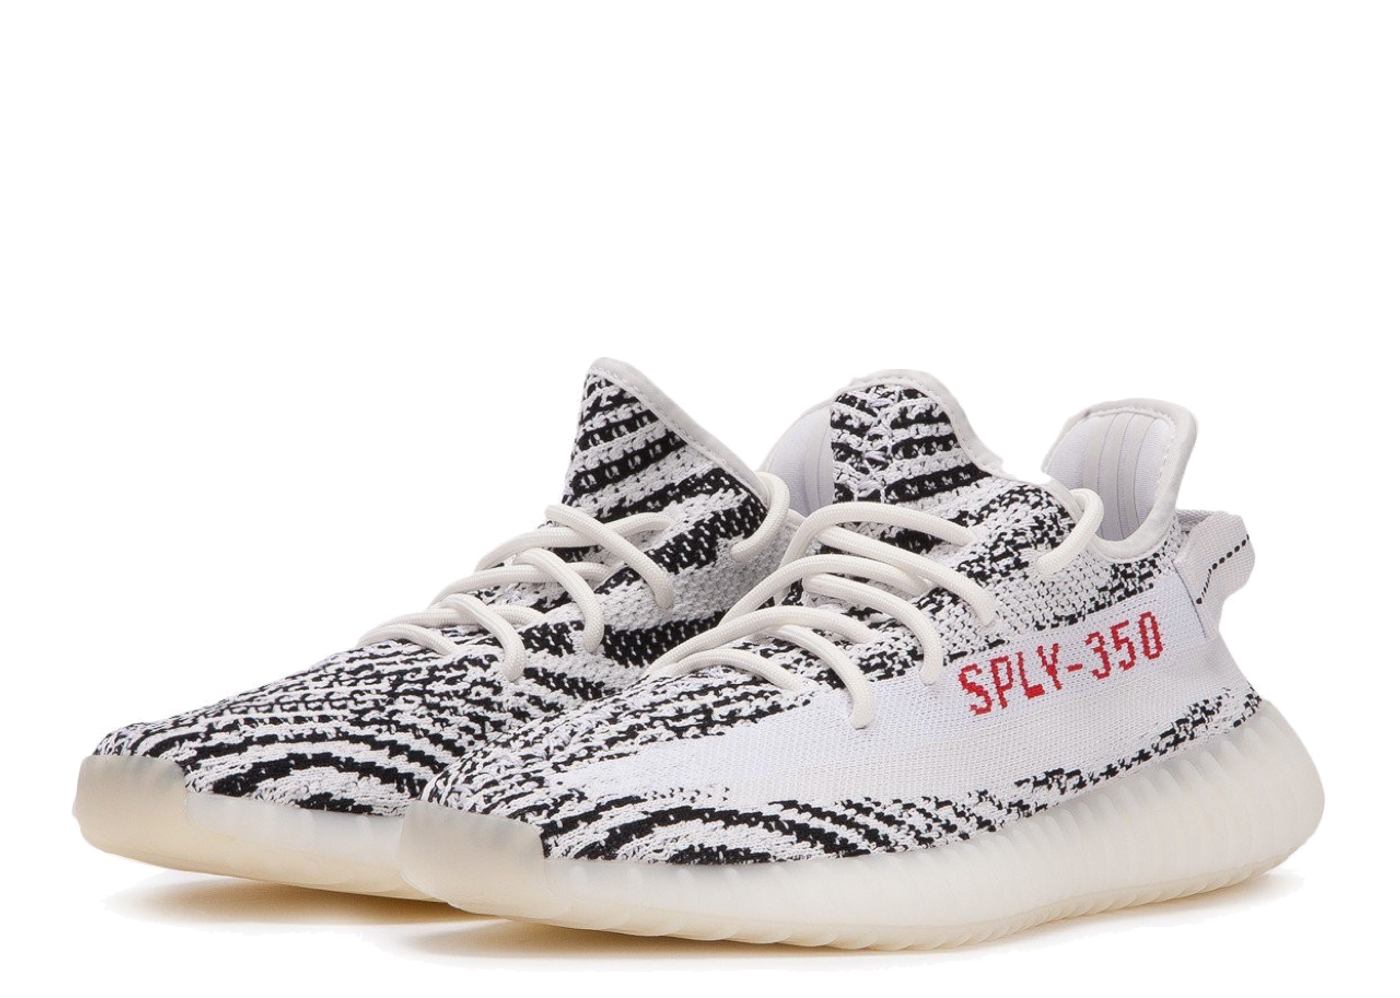 adidas Announce Yeezy BOOST 350 V2 'zebra' Release Details